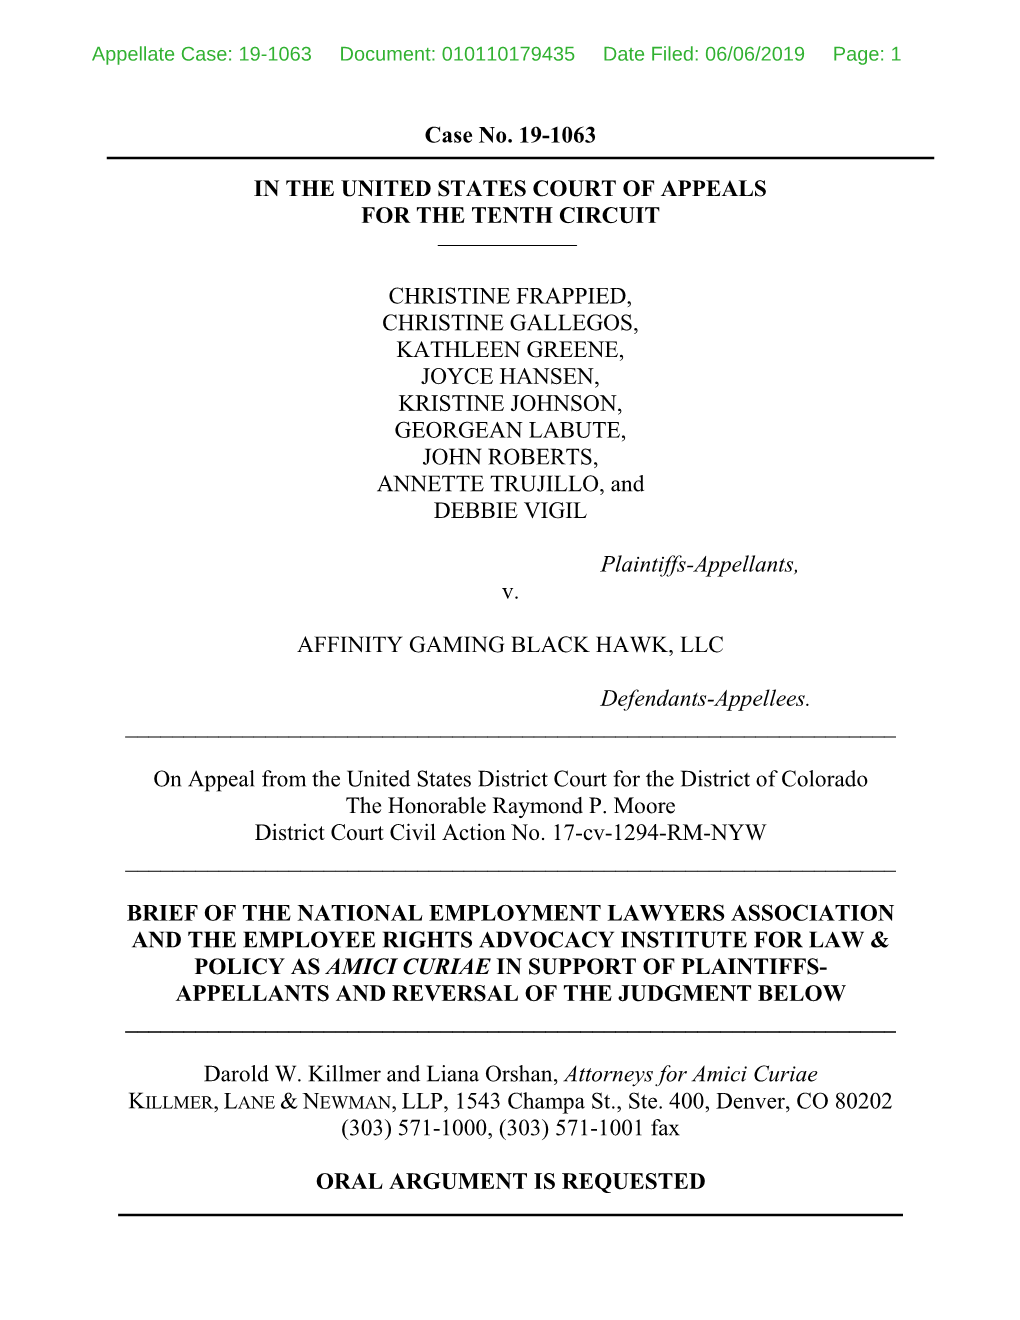 Case No. 19-1063 in the UNITED STATES COURT of APPEALS